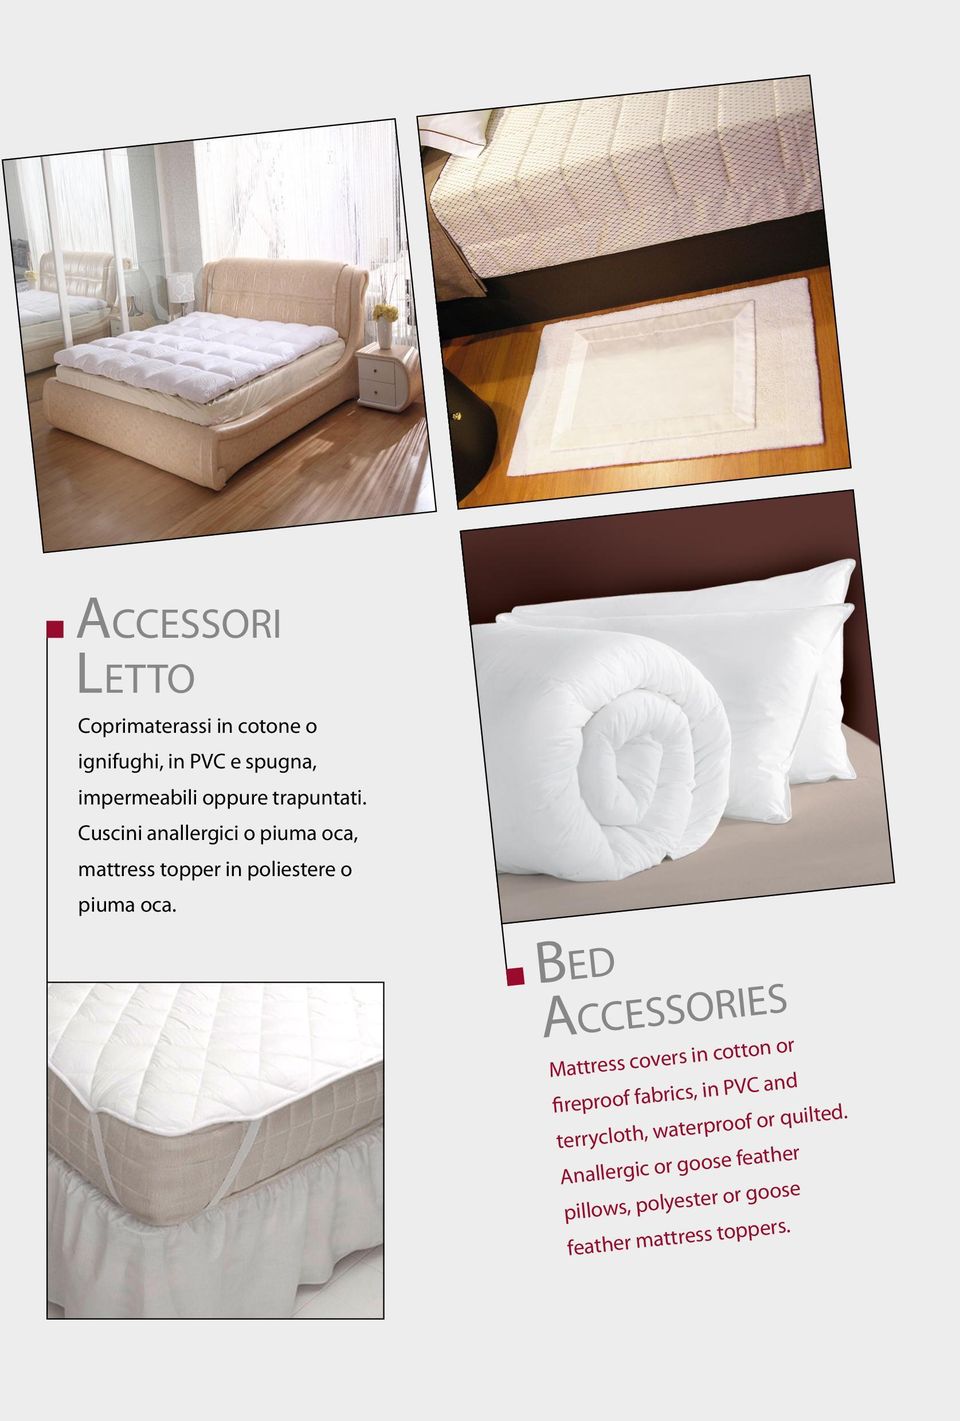 Bed Accessories Mattress covers in cotton or fireproof fabrics, in PVC and terrycloth,